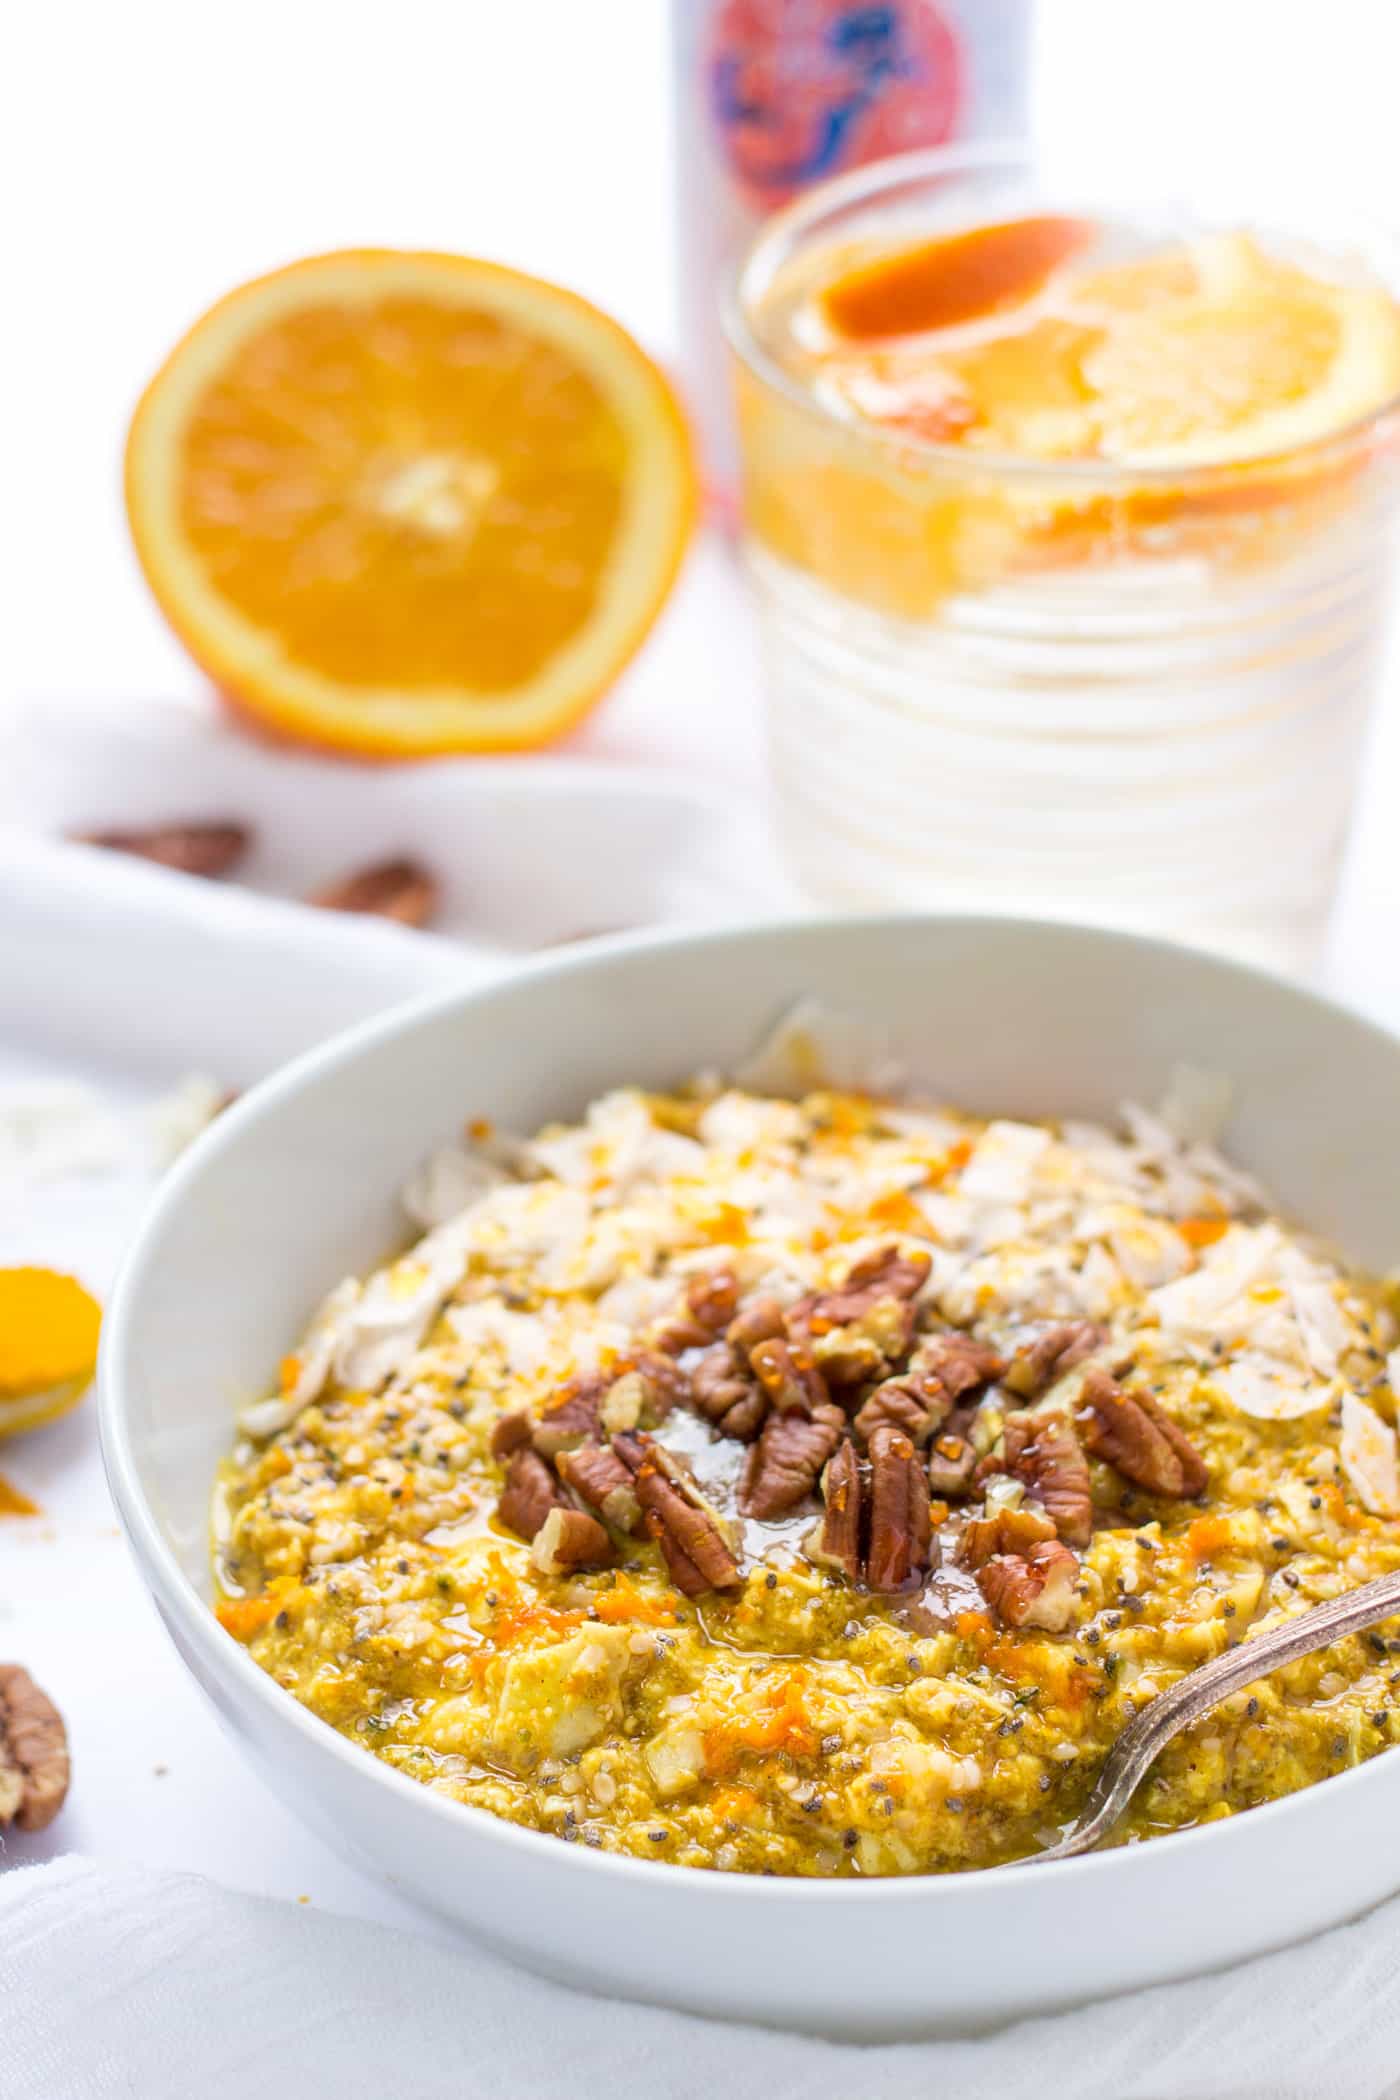 Overnight Quinoa flavored with orange and turmeric will help fight inflammation and energize your day!